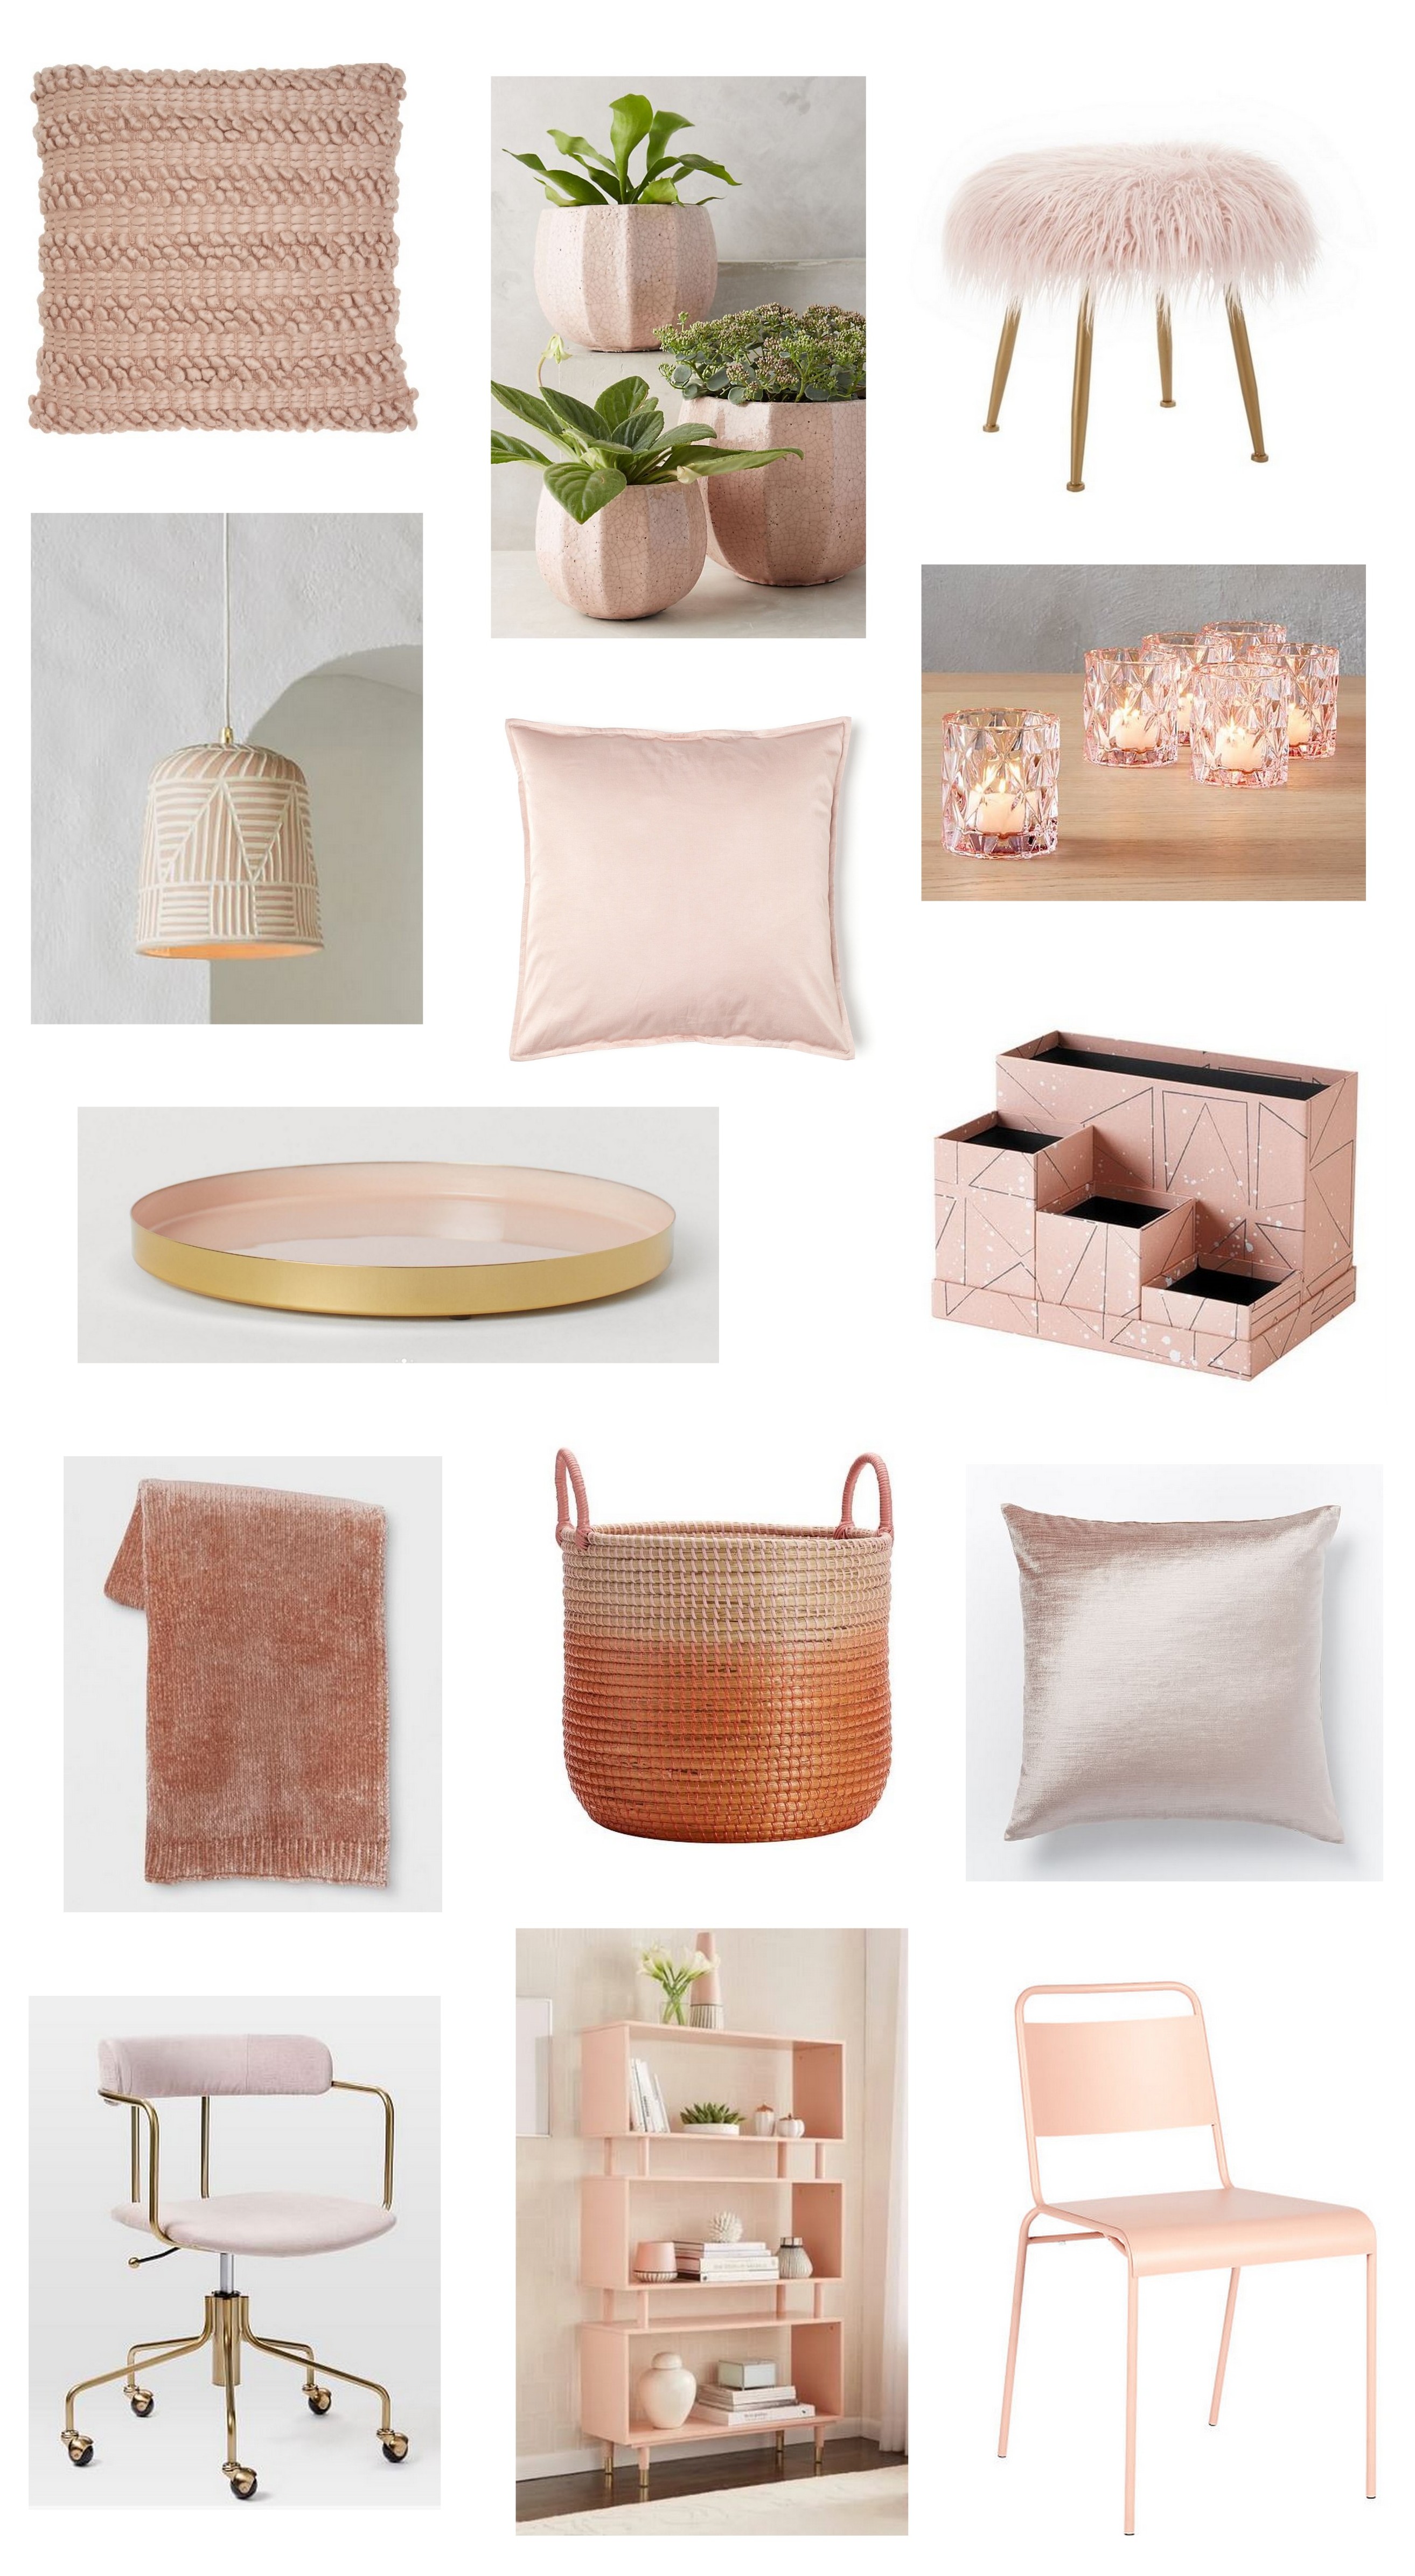 Trending: Blush Pink Accents